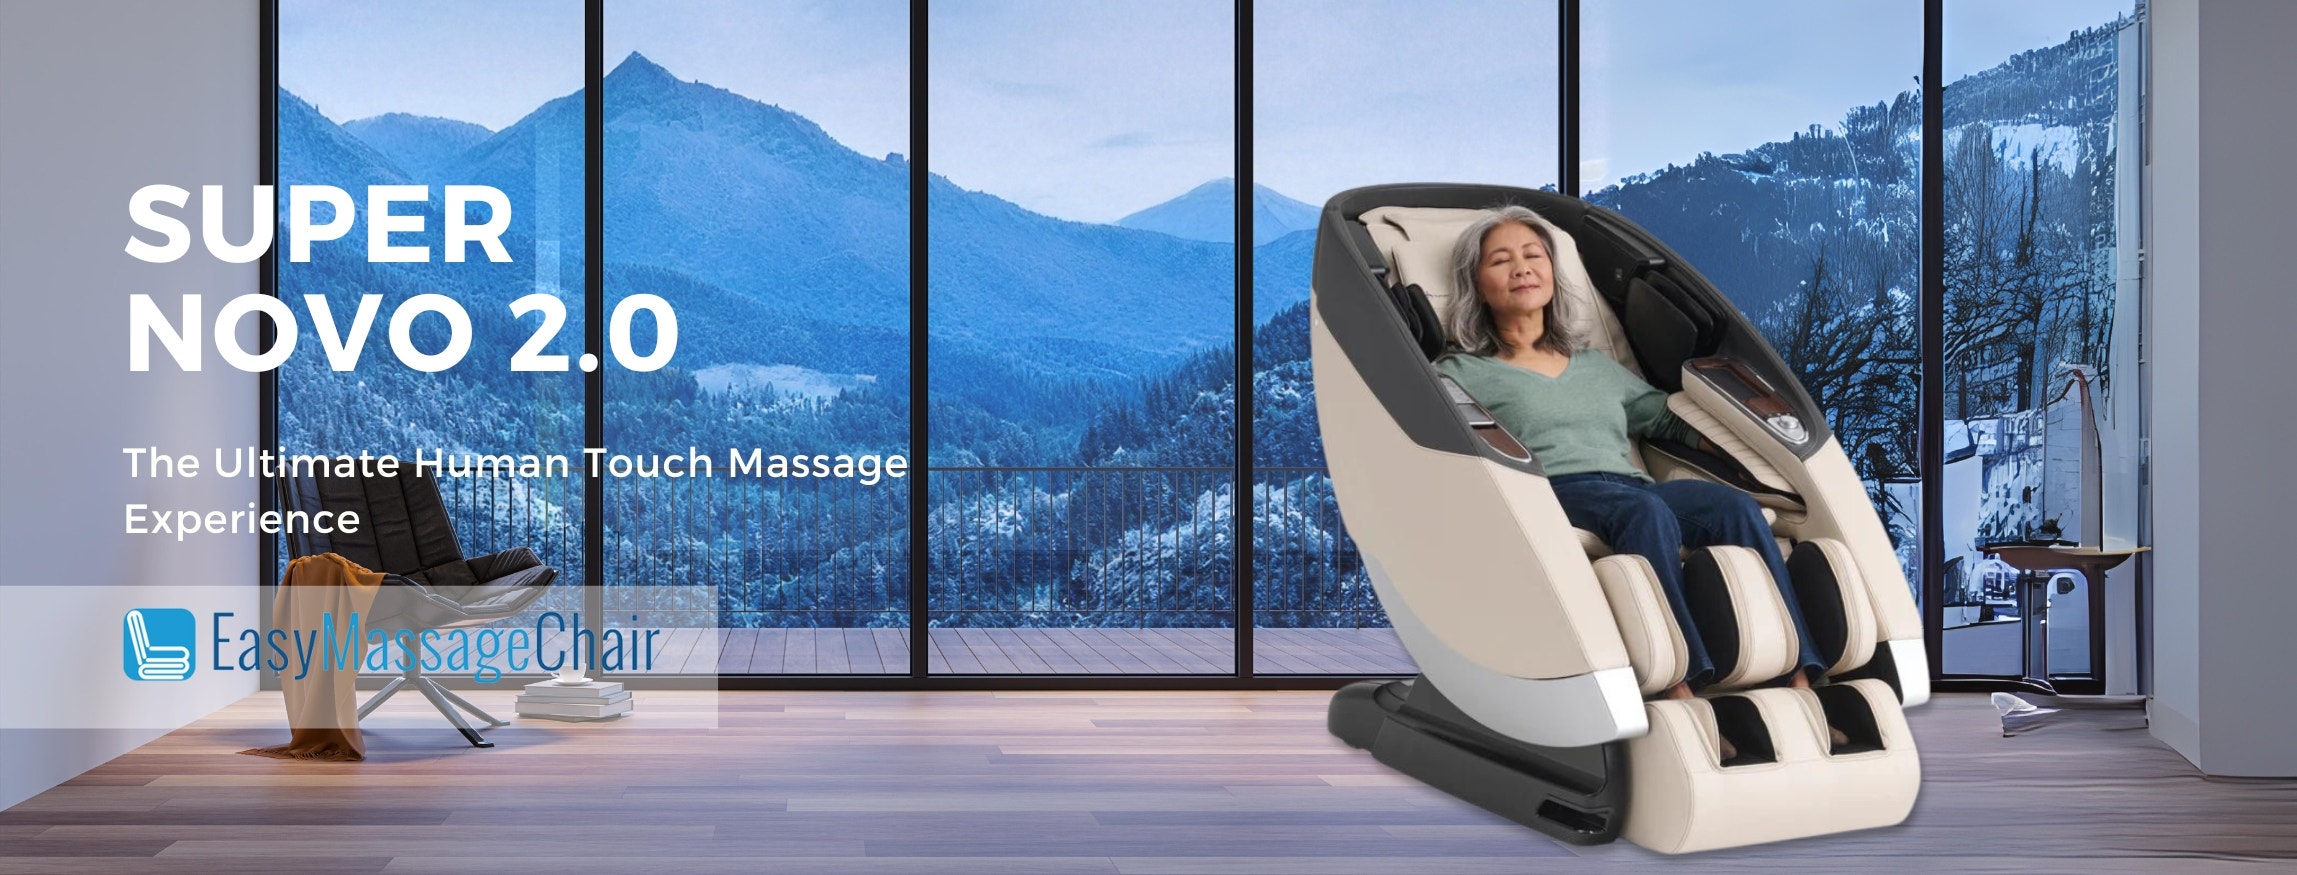 Serenity Reimagined: Human Touch Super Novo 2.0 Ultimate Massage Experience